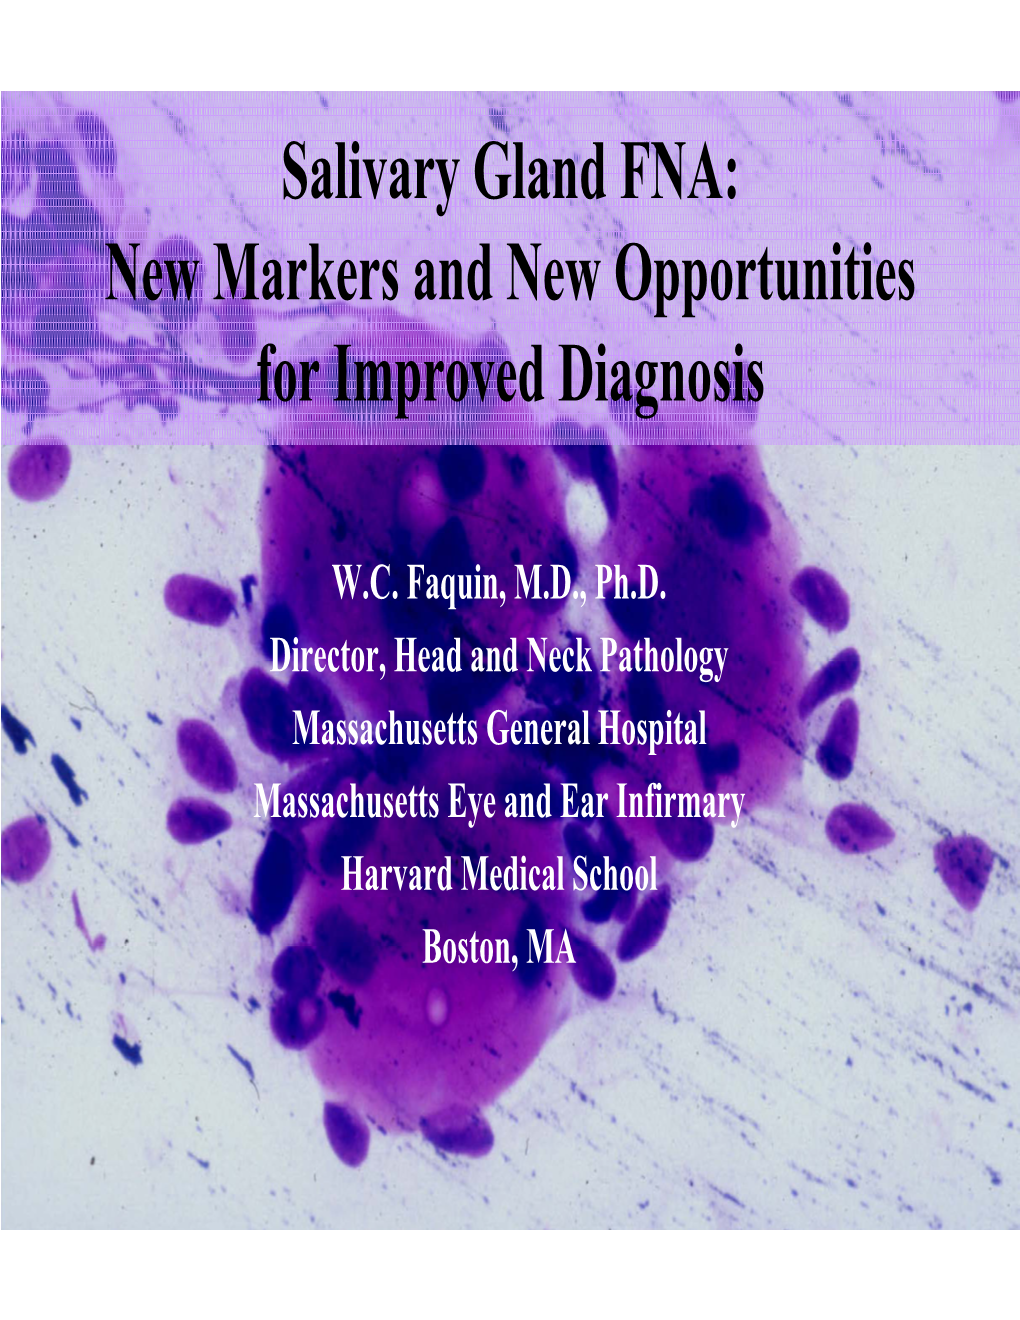 Salivary Gland FNA: New Markers and New Opportunities for Improved Diagnosis